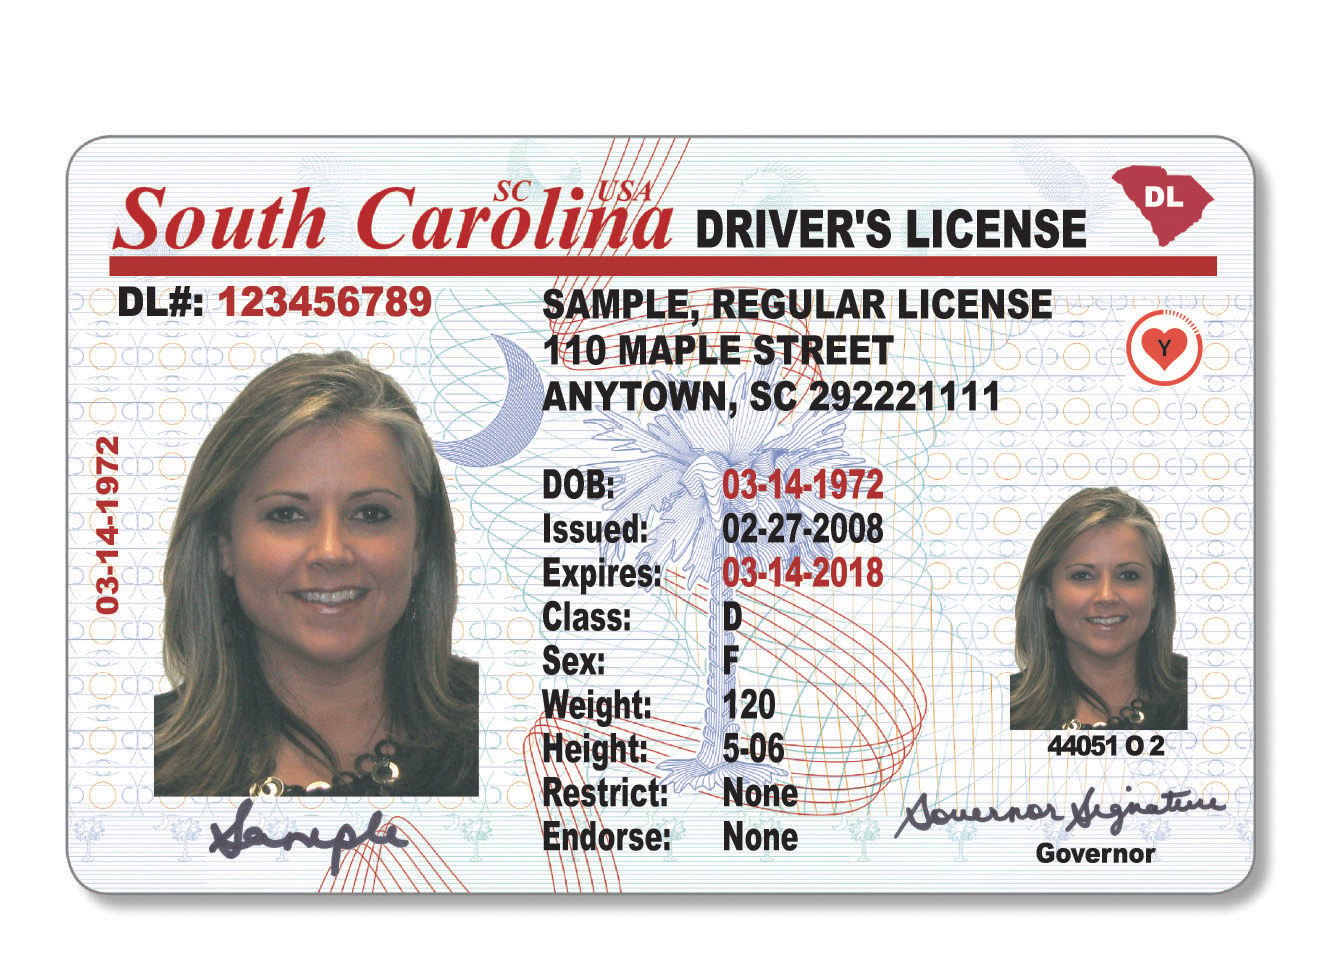 South Carolina rolling out new drivers licenses to meet governments REAL ID rules News postandcourier hq image